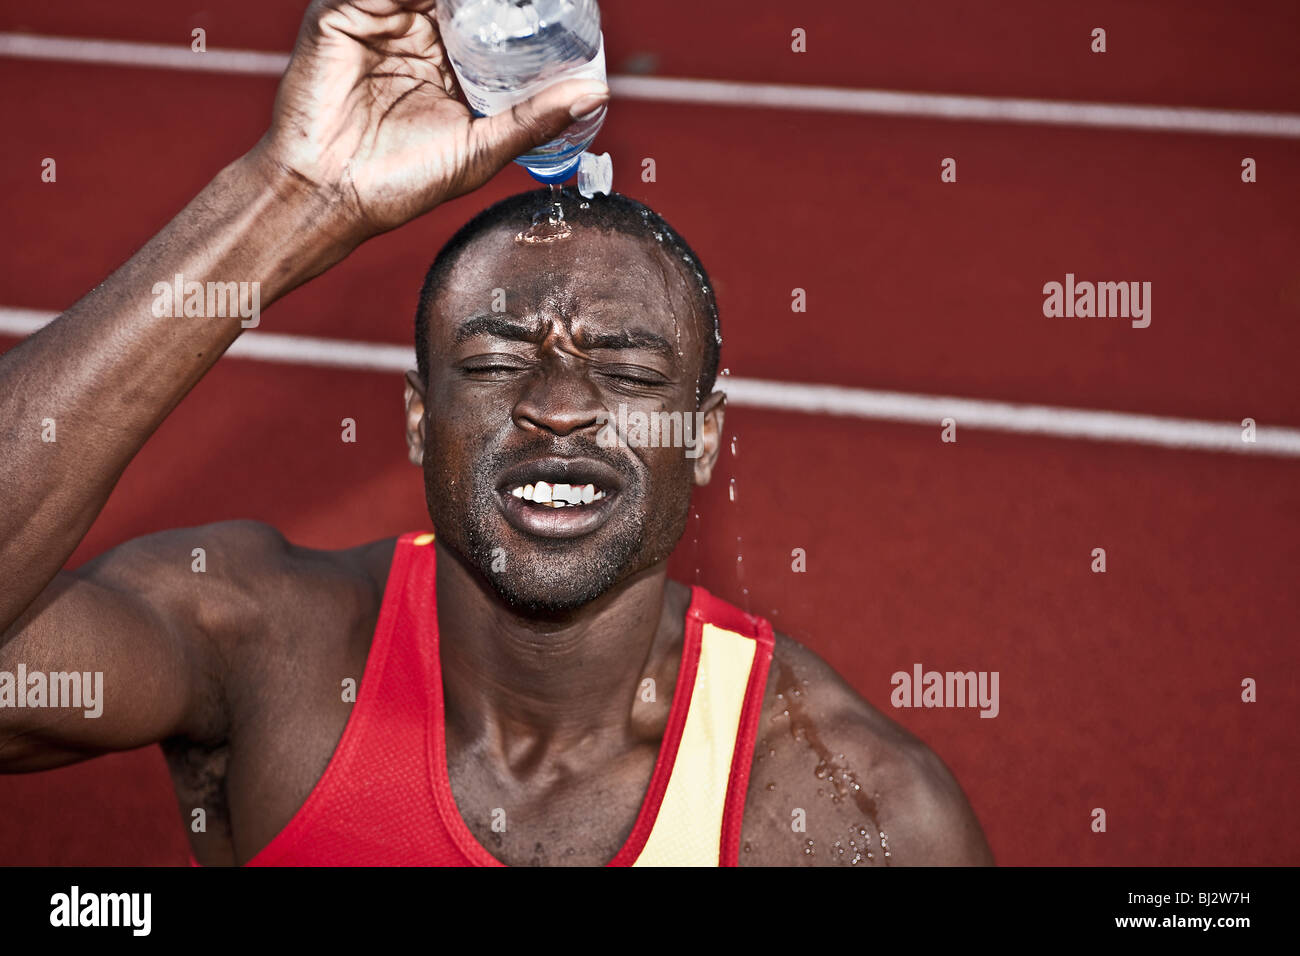 male athlete pouring water over his head Stock Photo